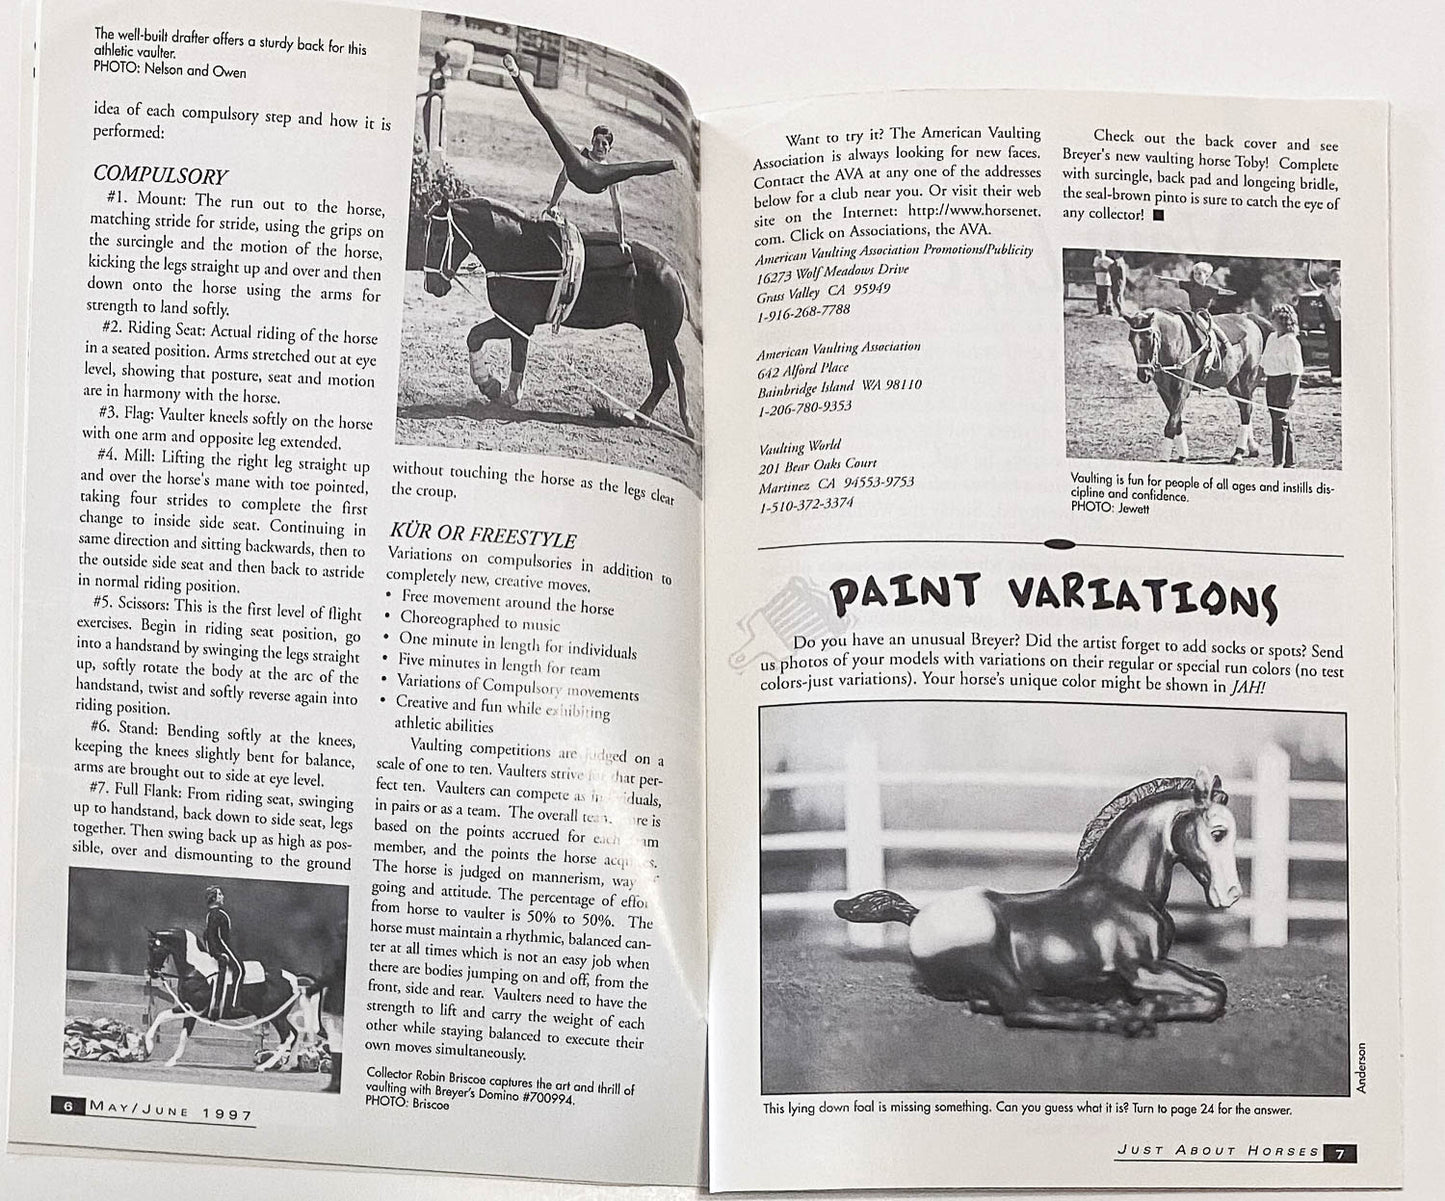 Just About Horses magazine Vol. 24, No. 3, 1997 May/June